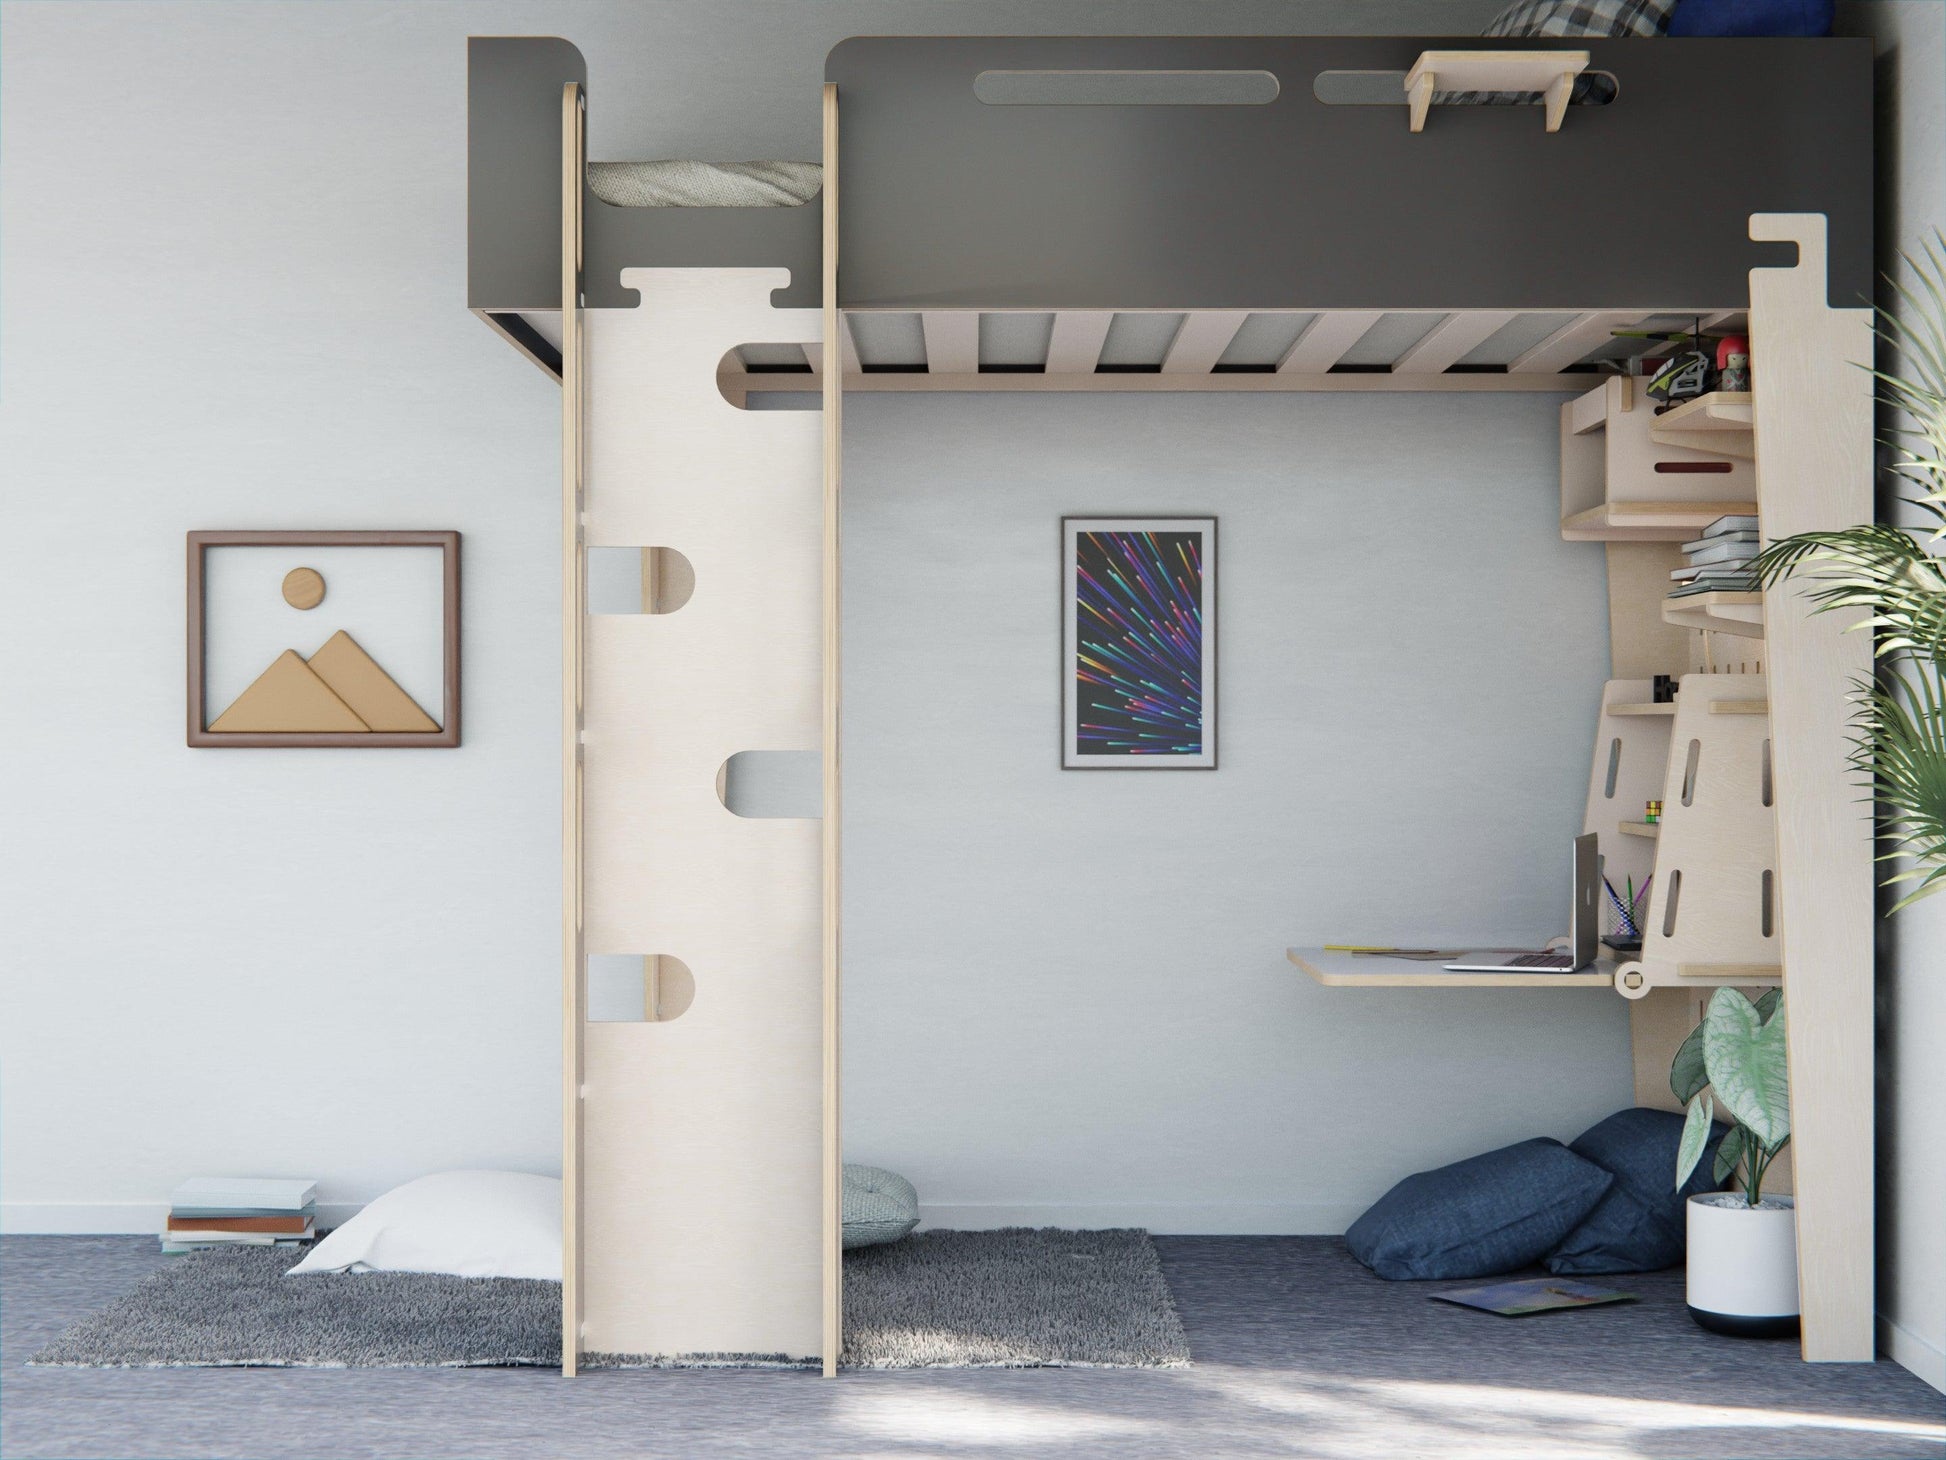 Maximize space with our black plywood loft bed featuring a built-in study desk. Sleep, study, succeed.